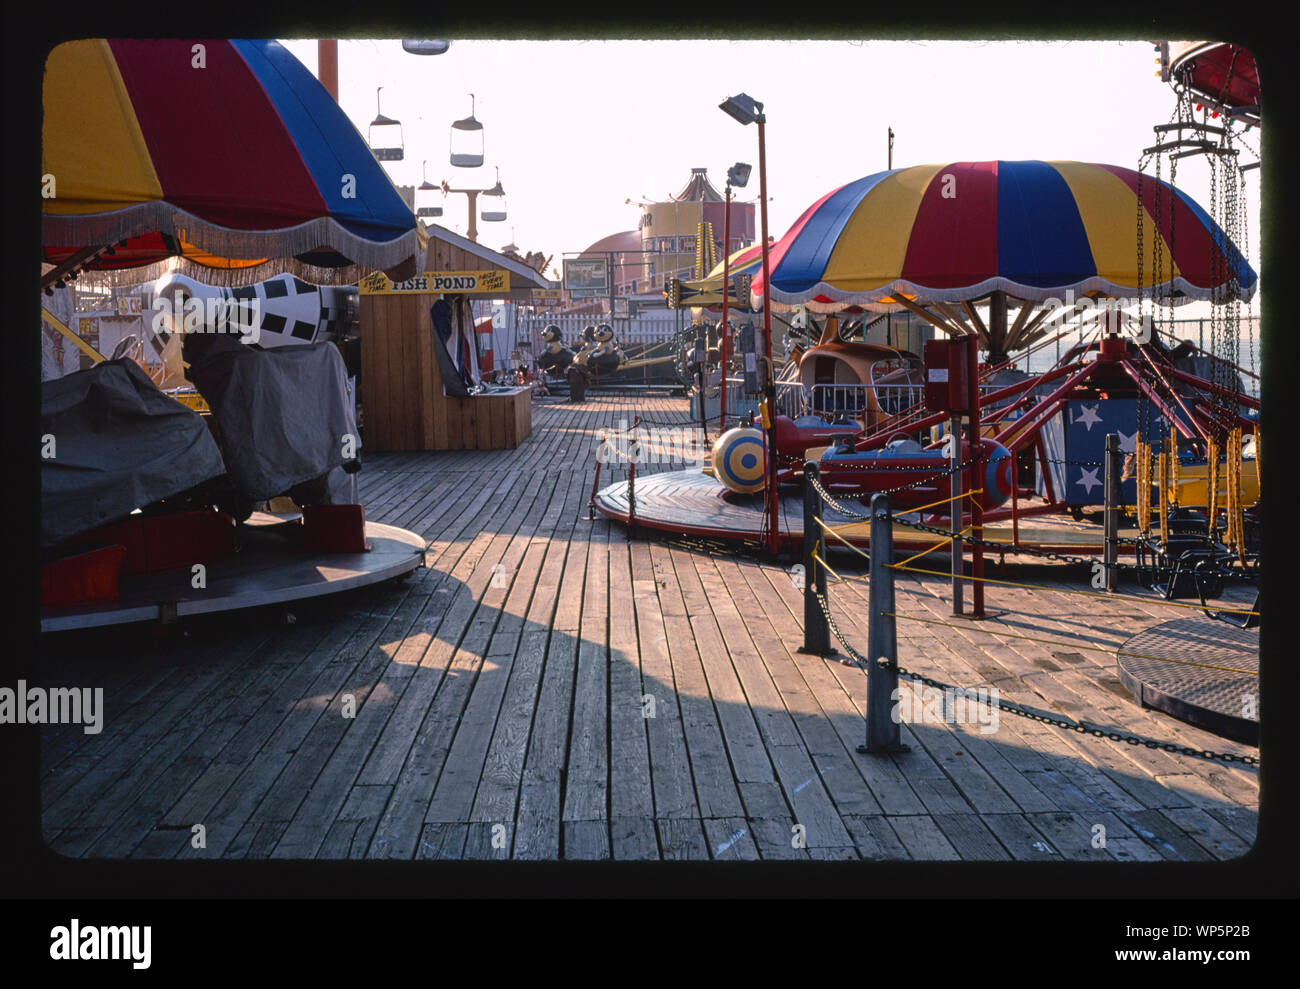 Kiddy rides, Seaside Heights, New Jersey Stock Photo